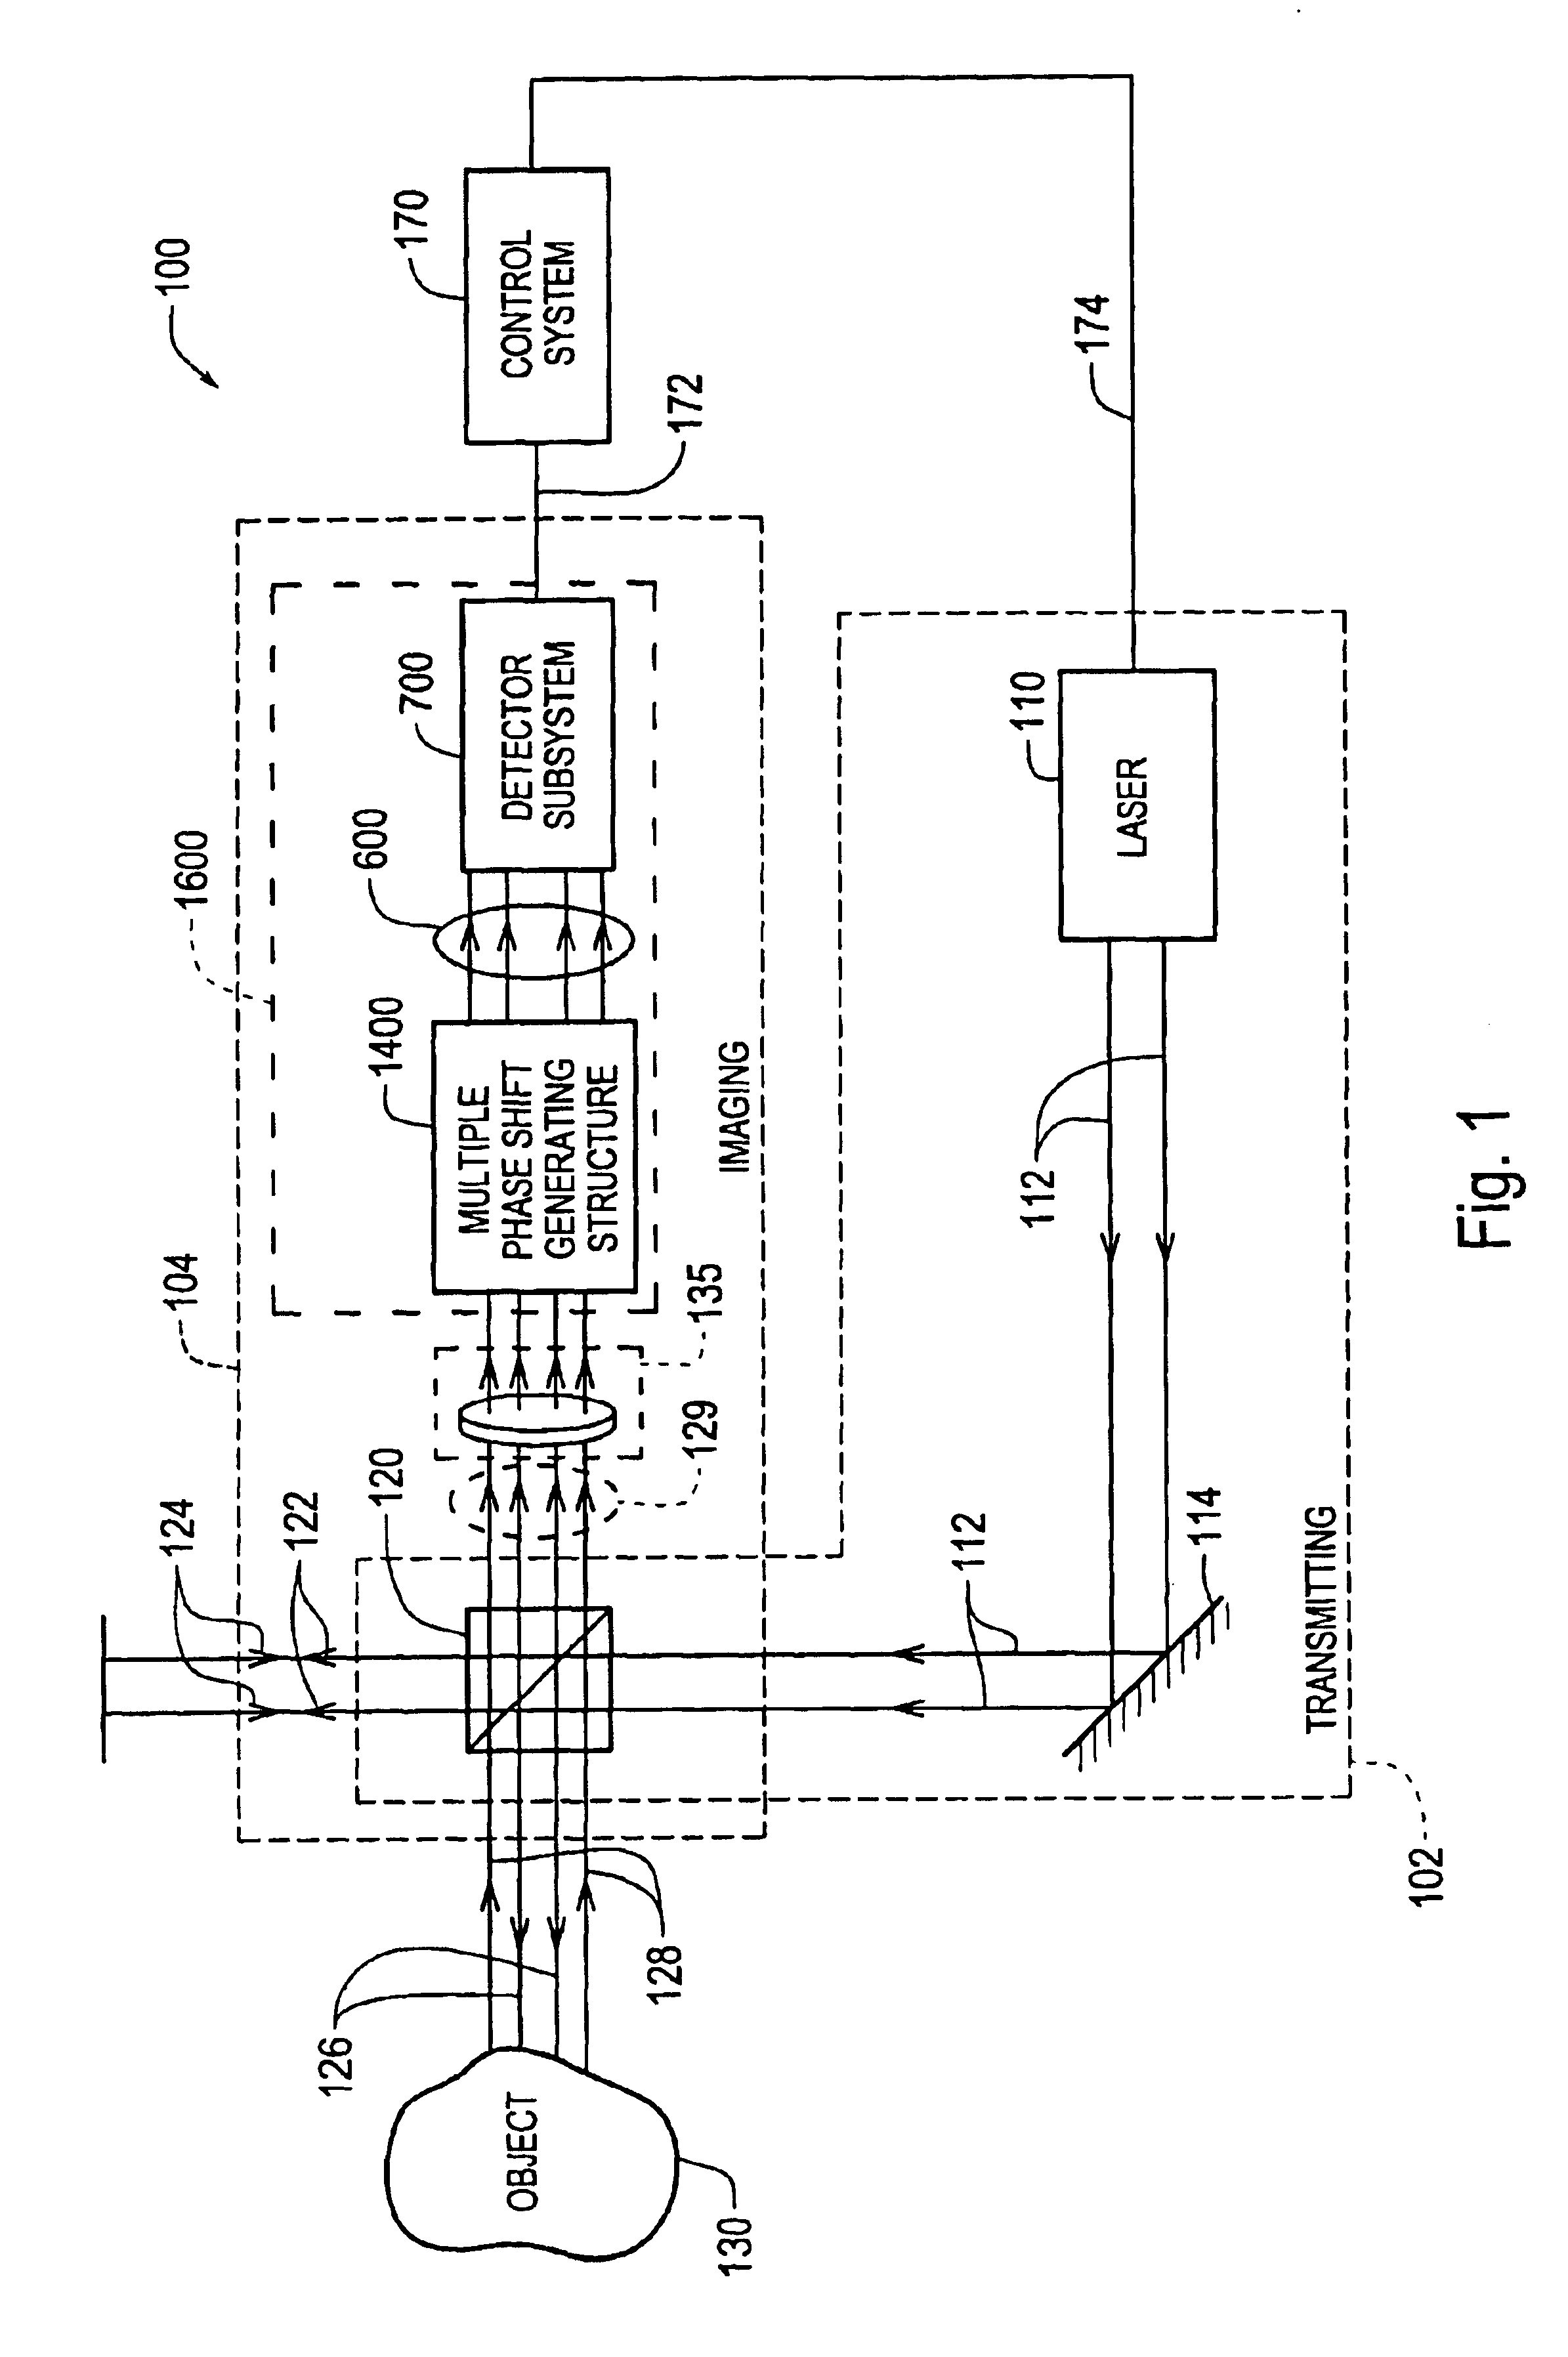 Interferometer using integrated imaging array and high-density polarizer array